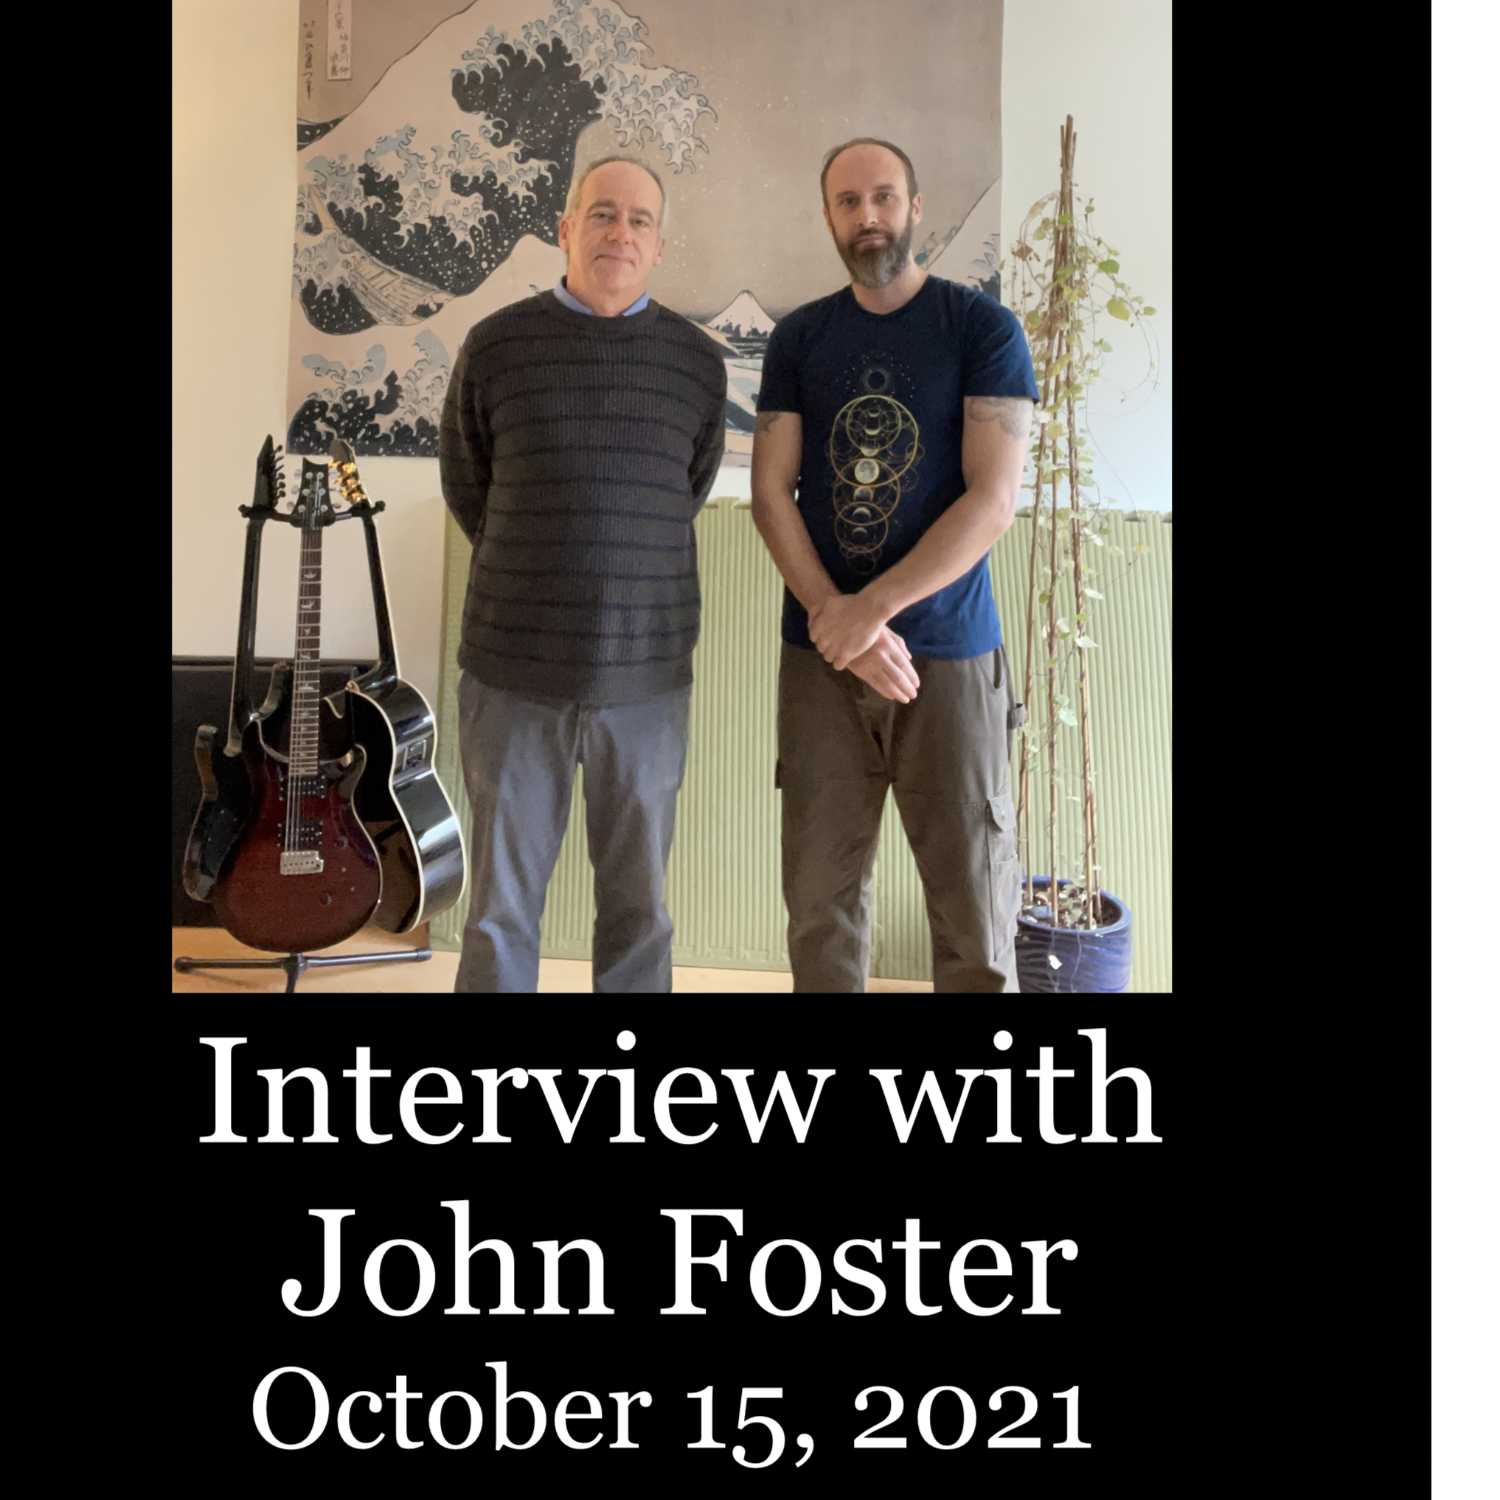 Interview with John Foster October 15th, 2021